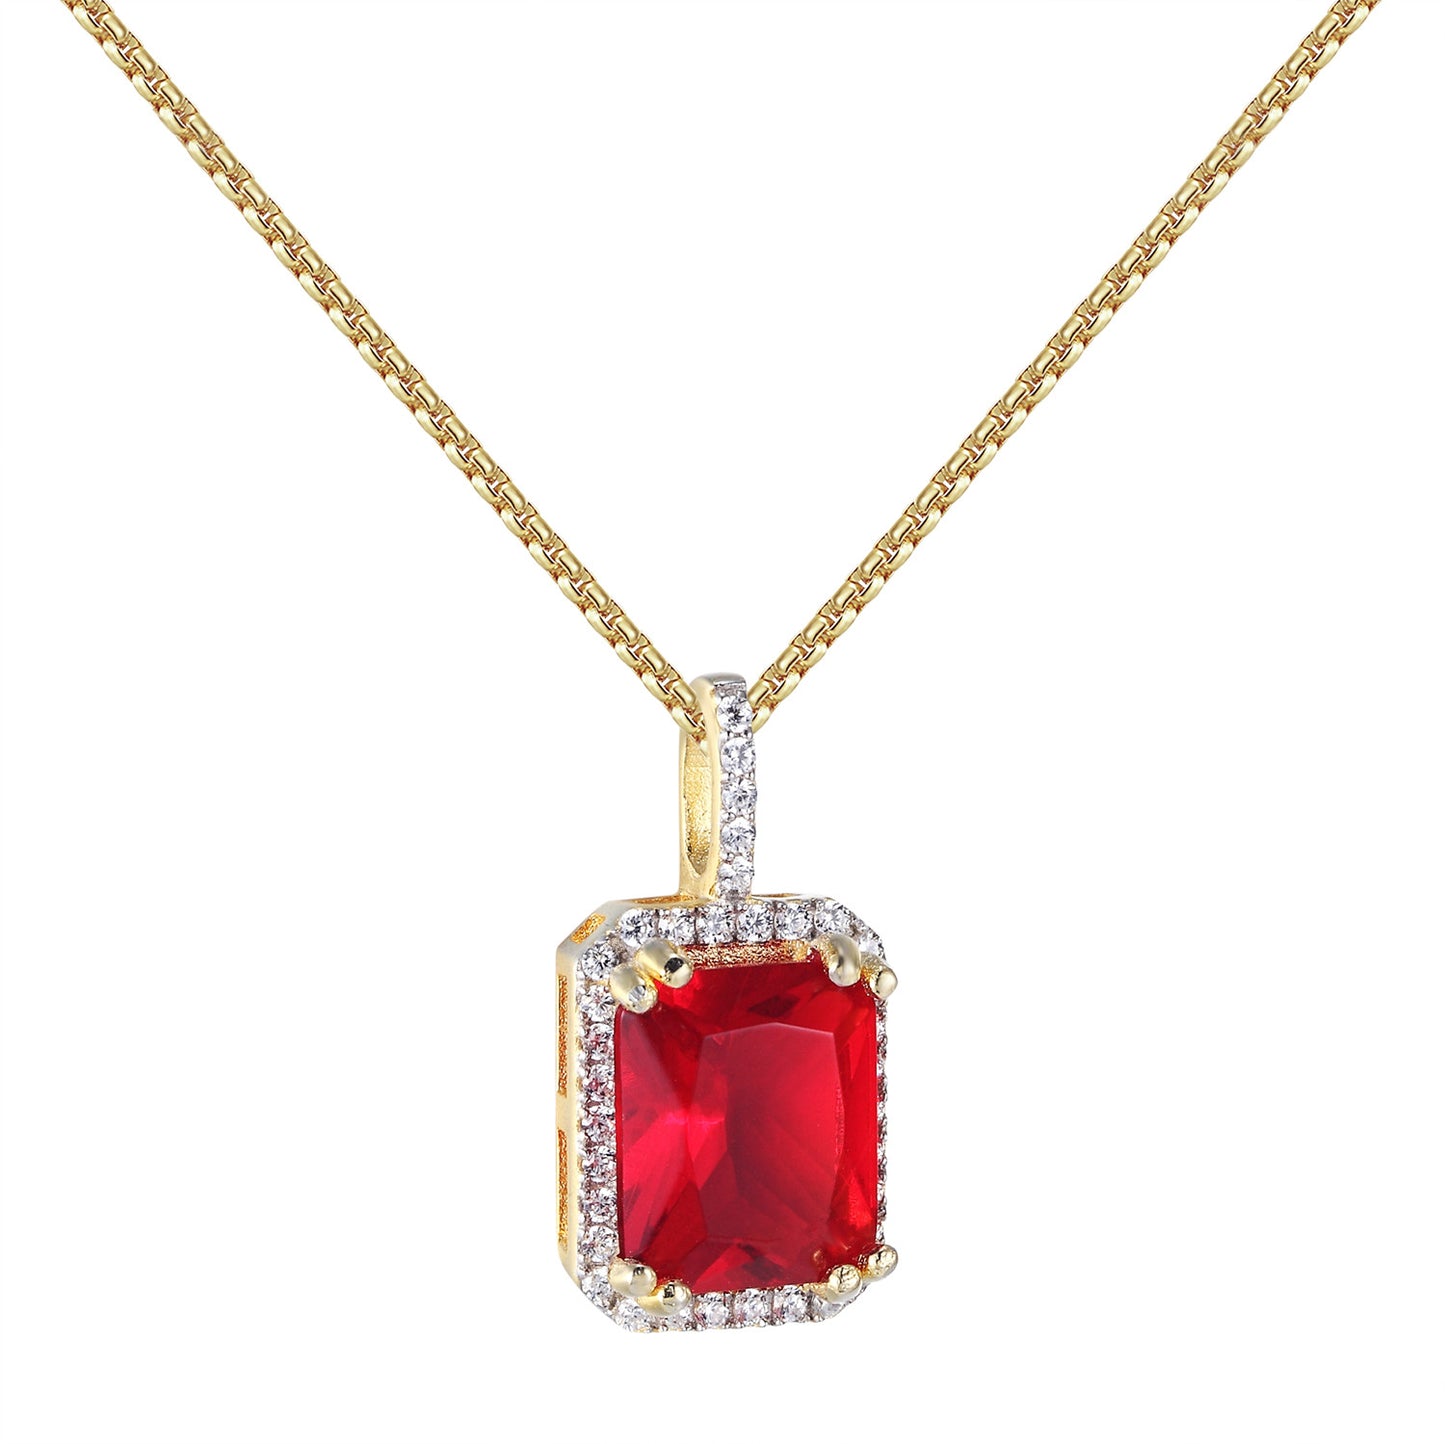 Red Ruby CZ Pendant Solitaire 14k Gold Finish Sterling Silver Free 24" Necklace